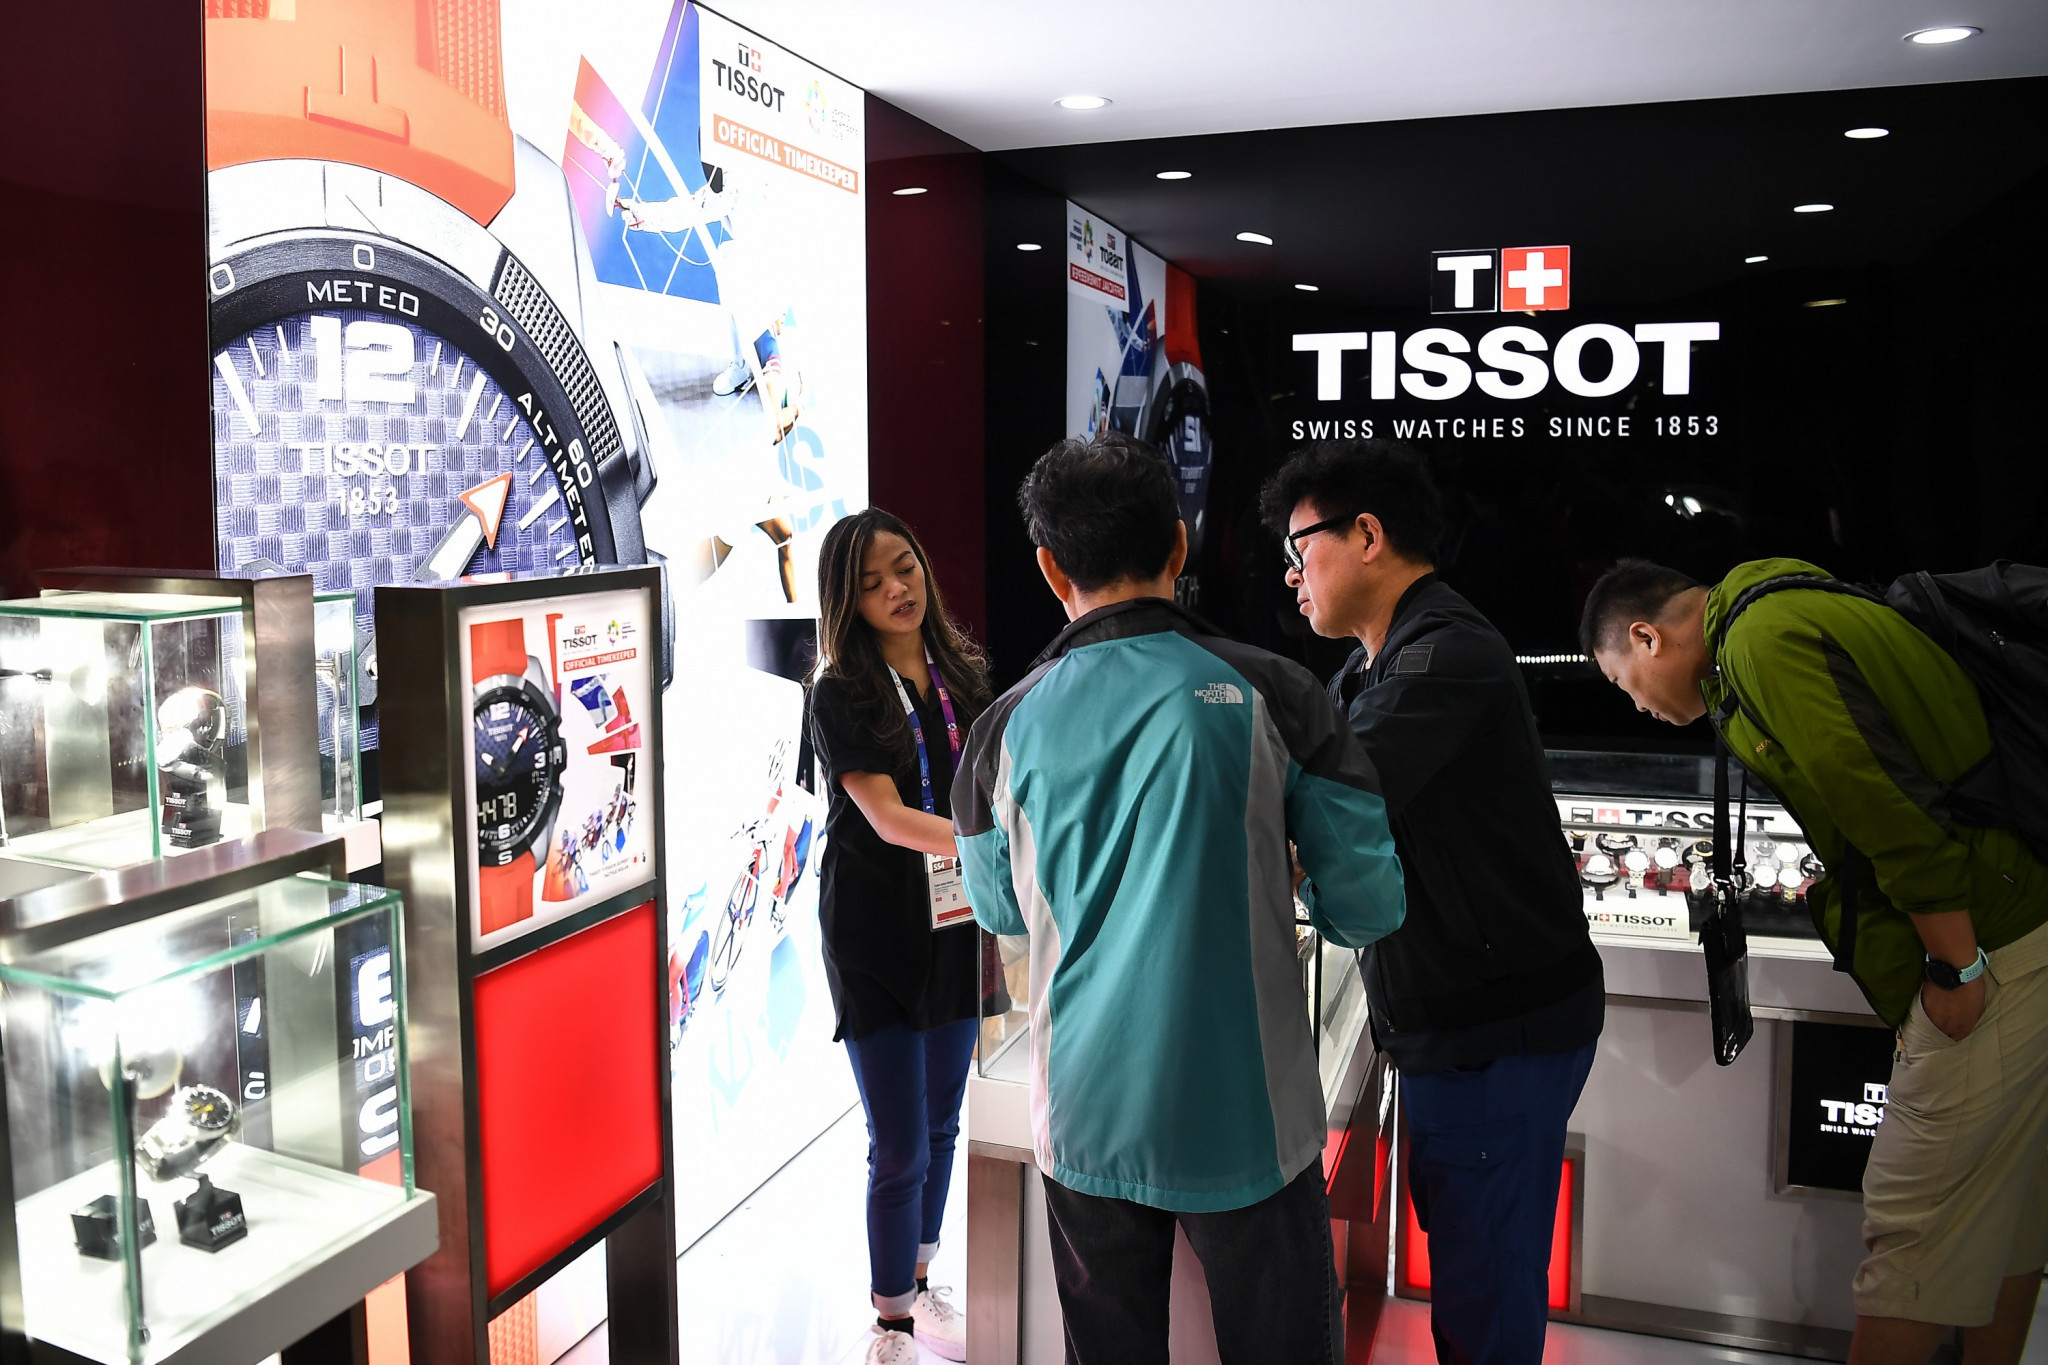 Journalists take the opportunity to view a booth dedicated to Tissot, the official timekeeper of the Games, in the Main Press Centre ©Getty Images